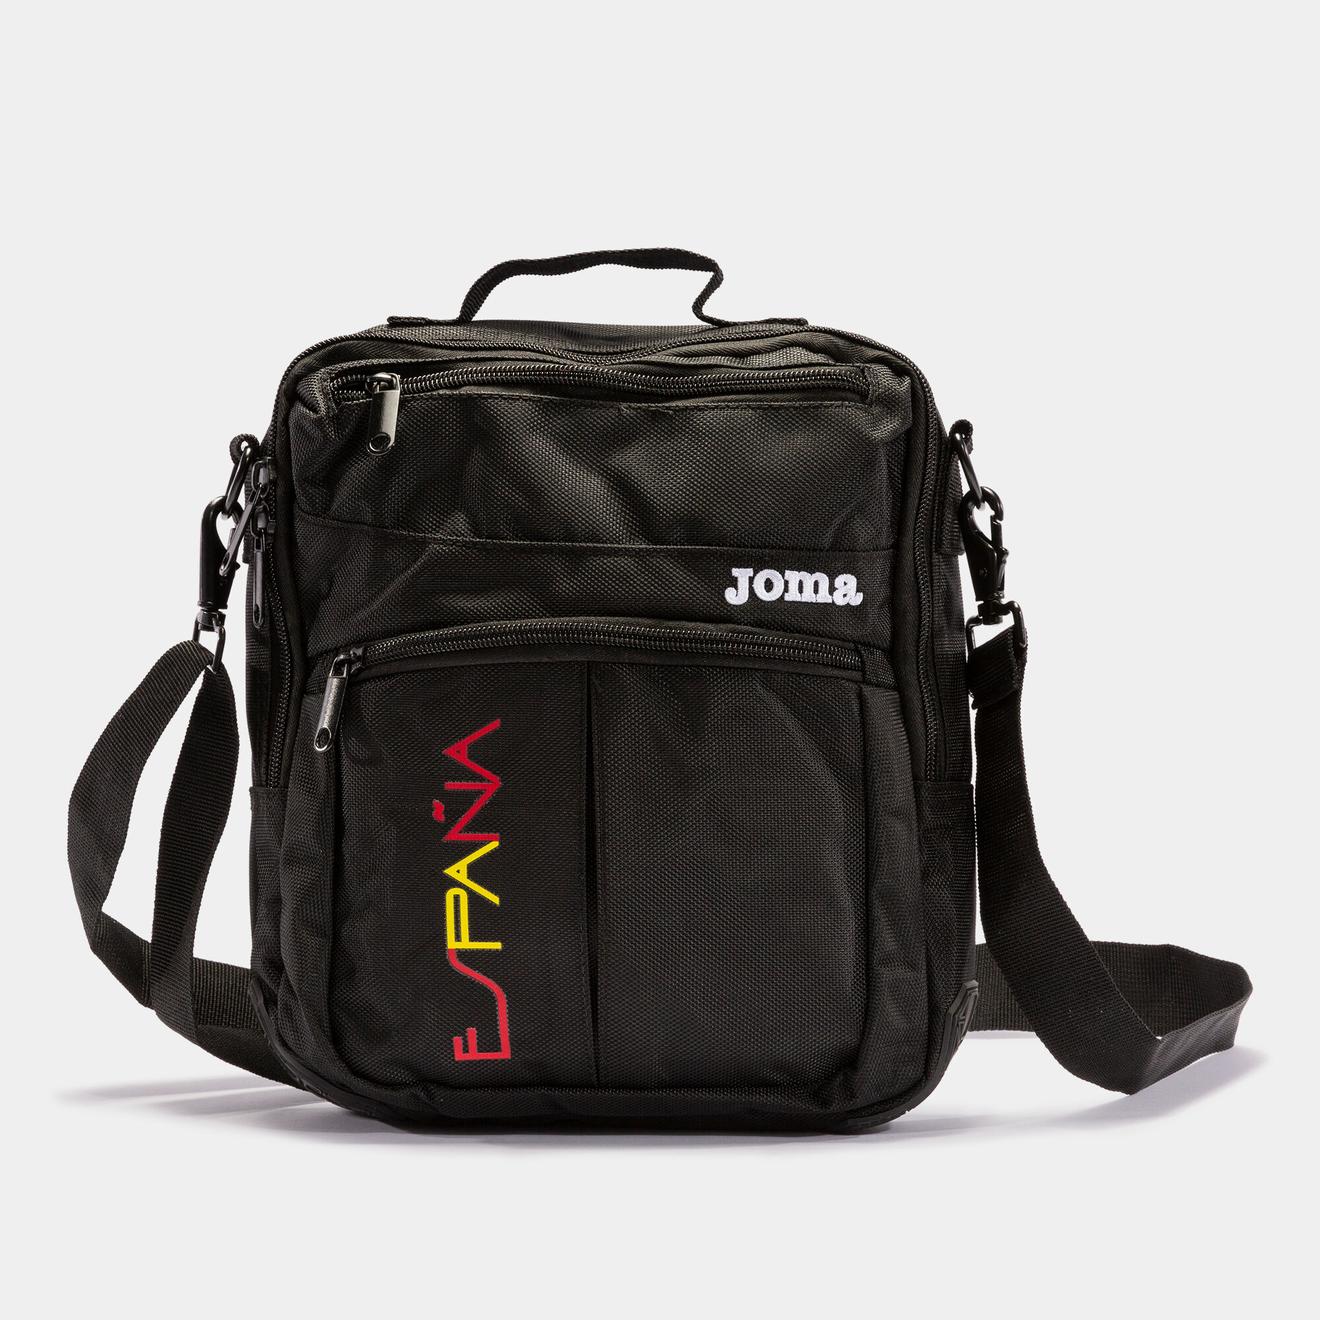 Shoulder bag leisure Spanish Olympic Committee offers at £39 in Joma